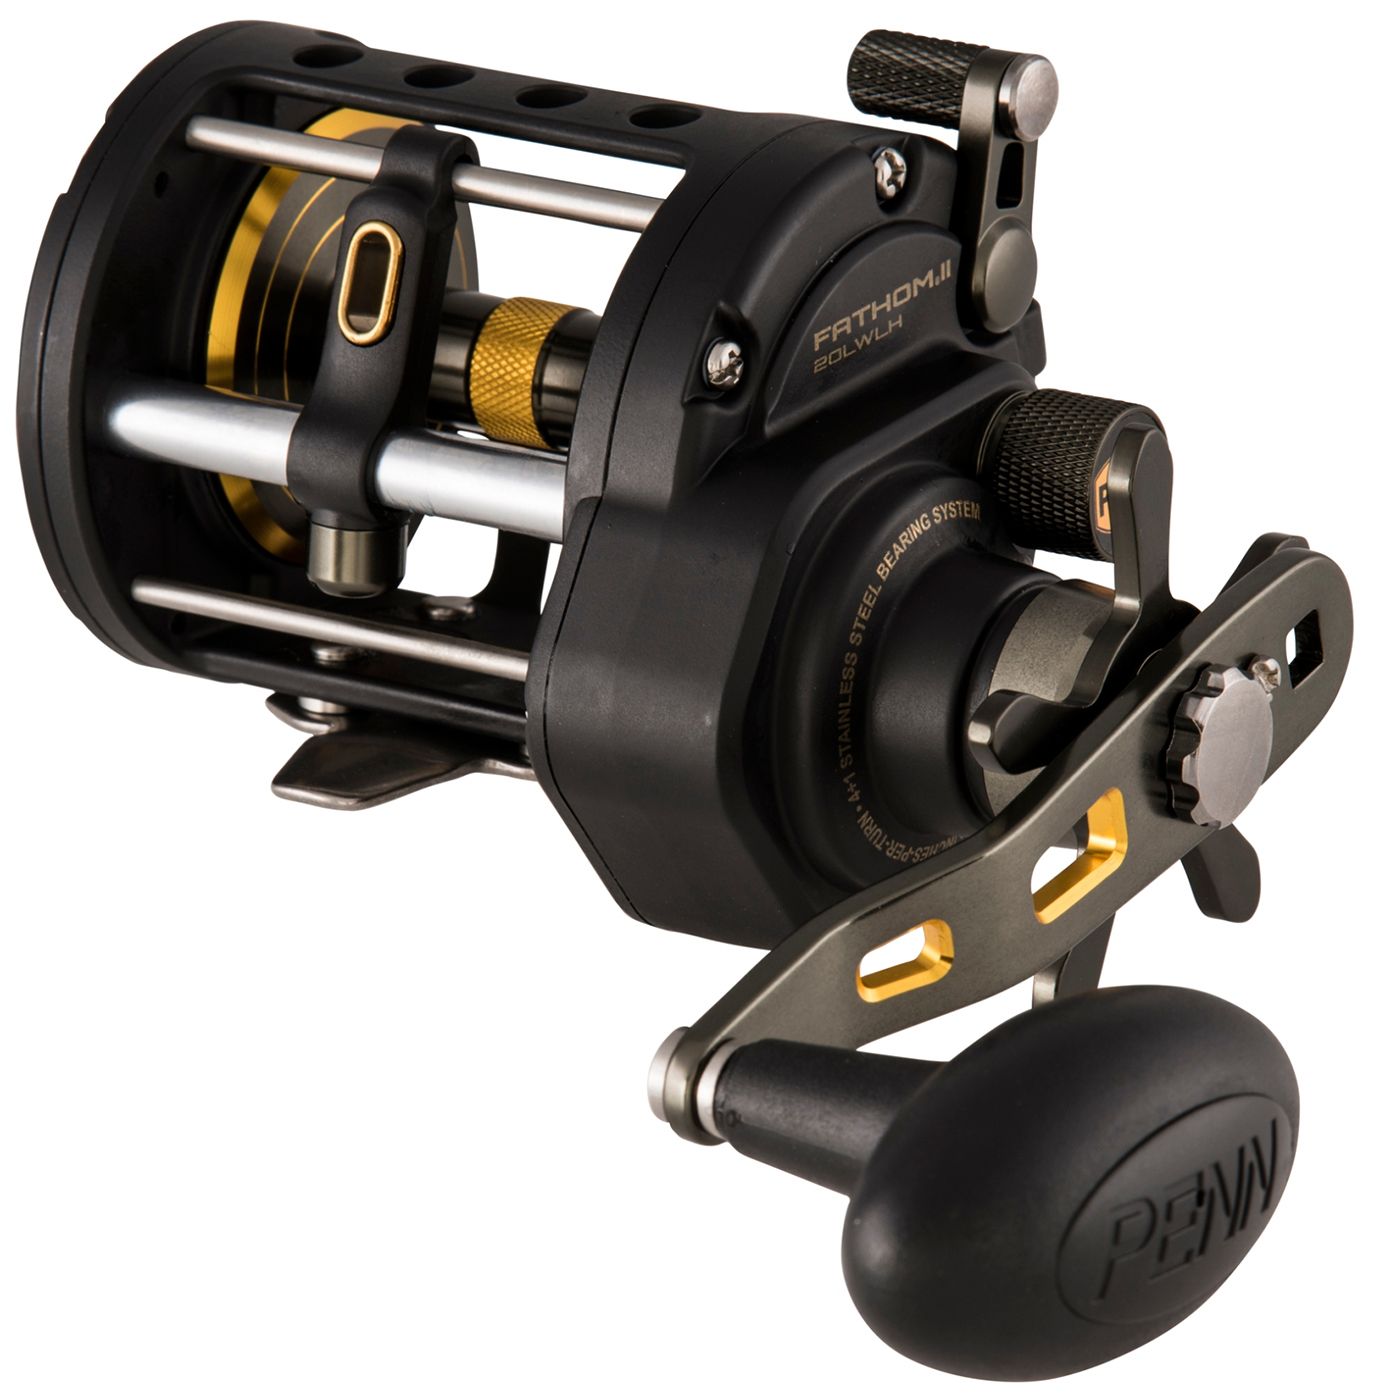 Penn Squall 30LW saltwater fishing reel how to take apart and